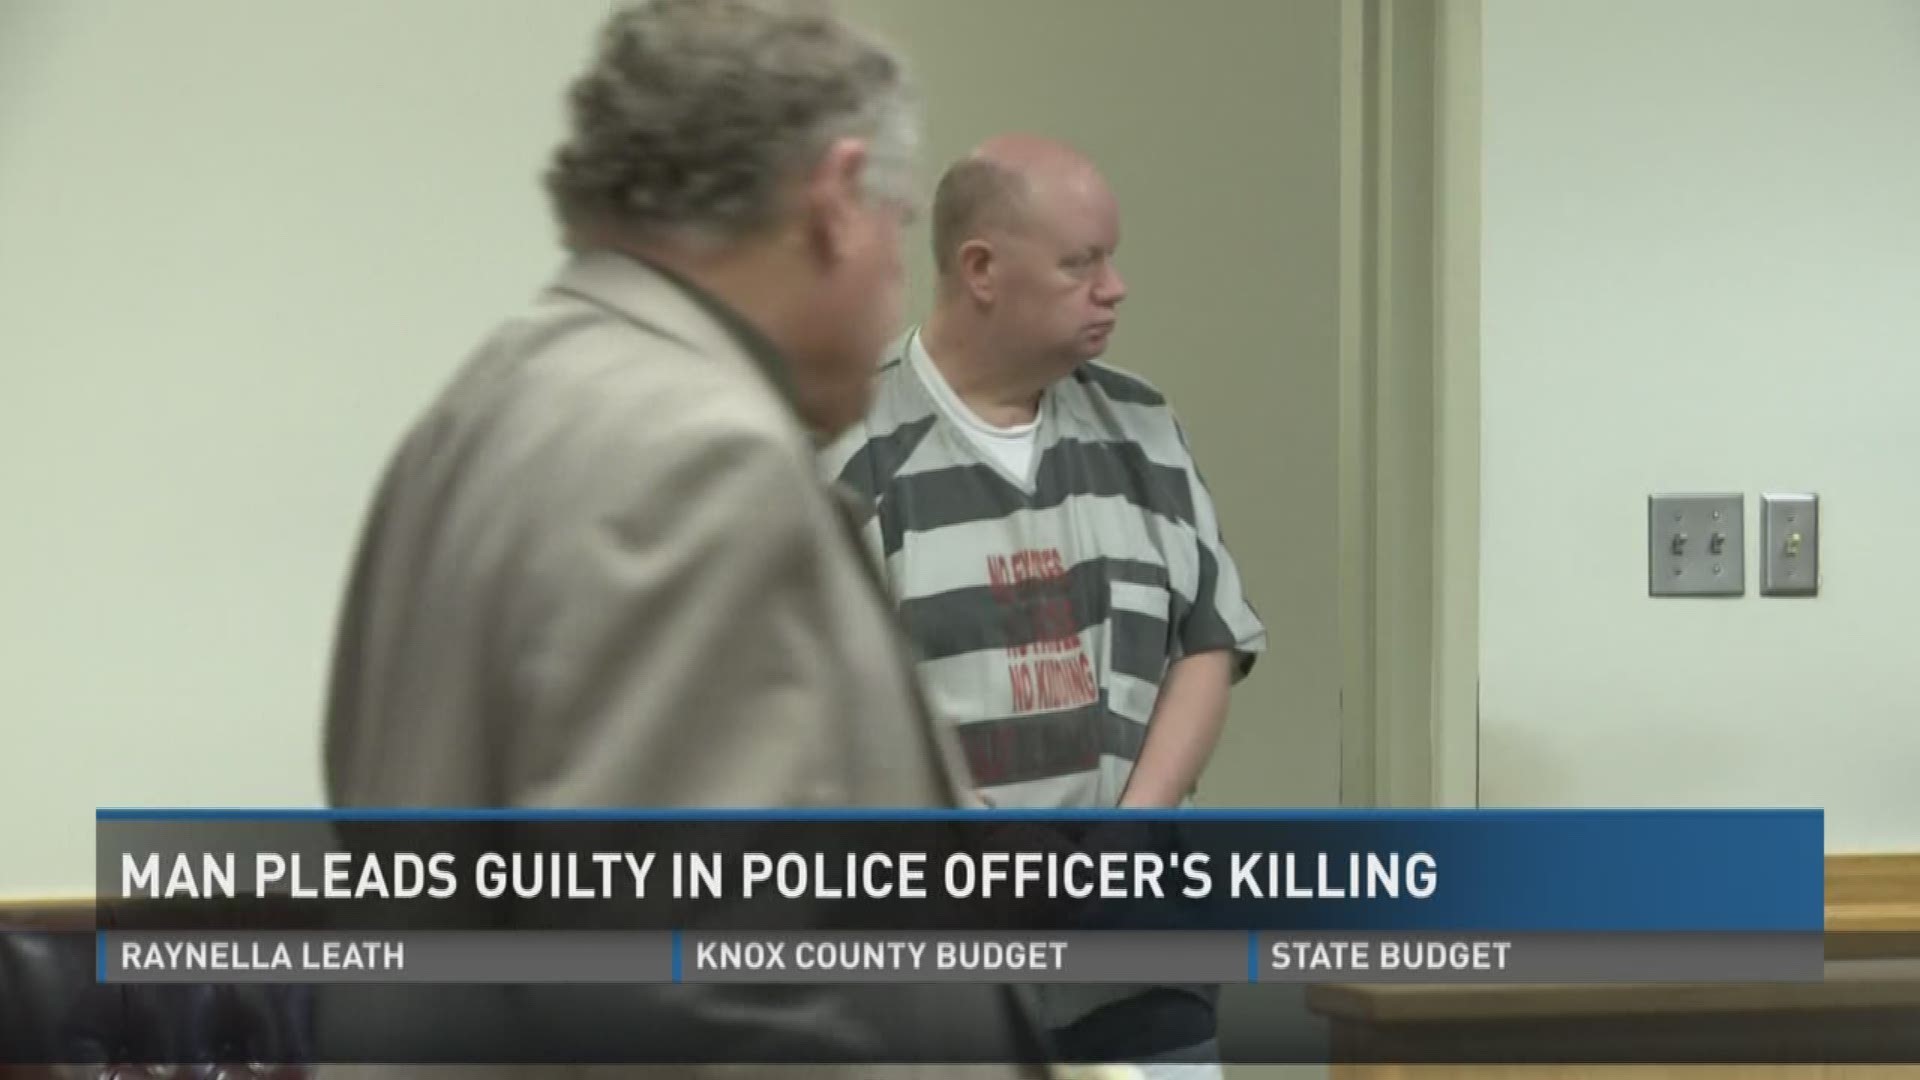 Brian K. Stalans will spend life in prison for killing Maryville police officer Kenny Moats in August 2016. (5/1/17 Noon)